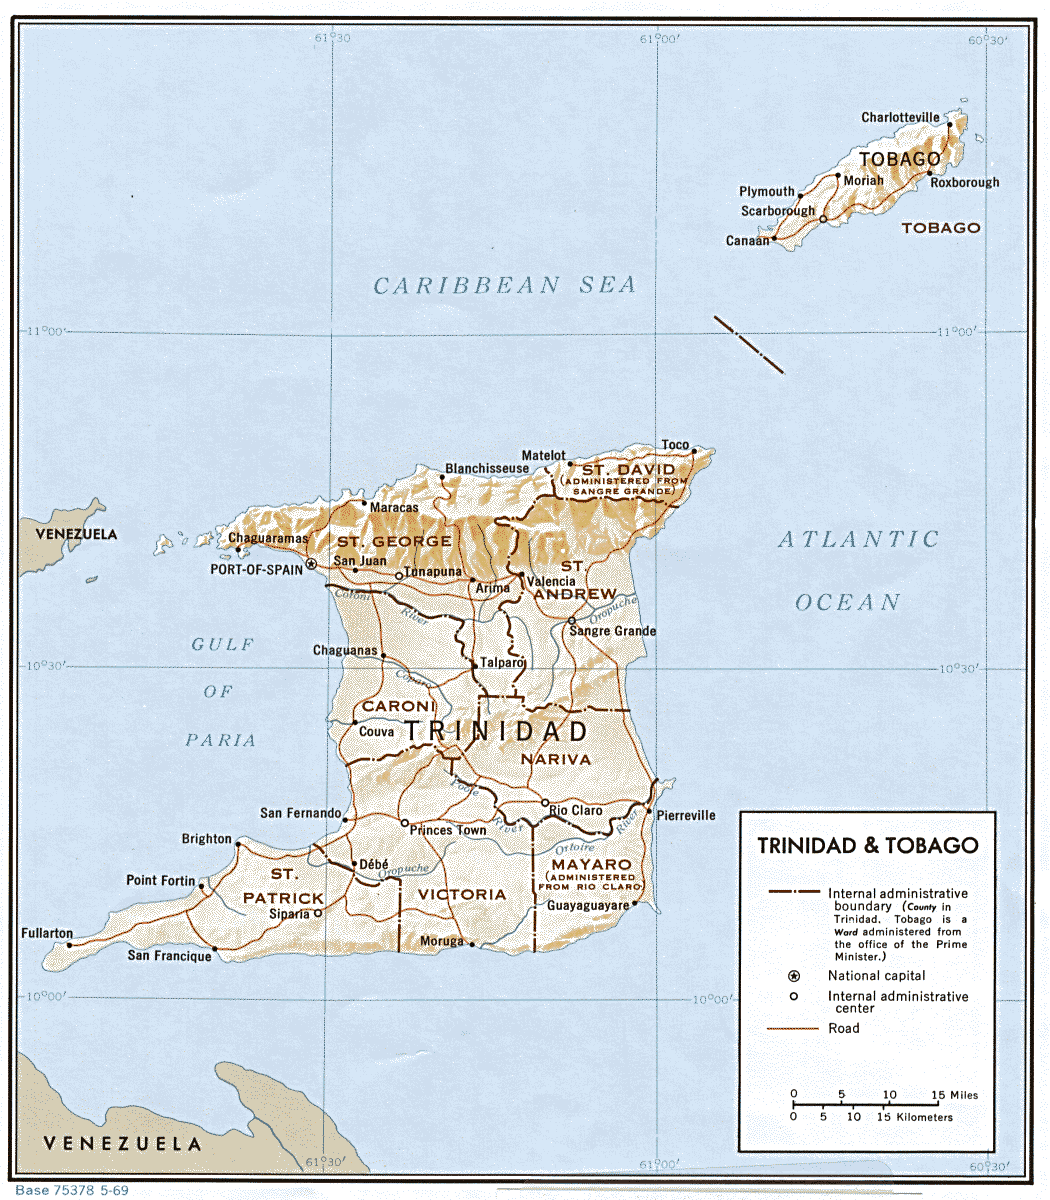 http://upload.wikimedia.org/wikipedia/commons/0/00/Trinidad_and_tobago.gif